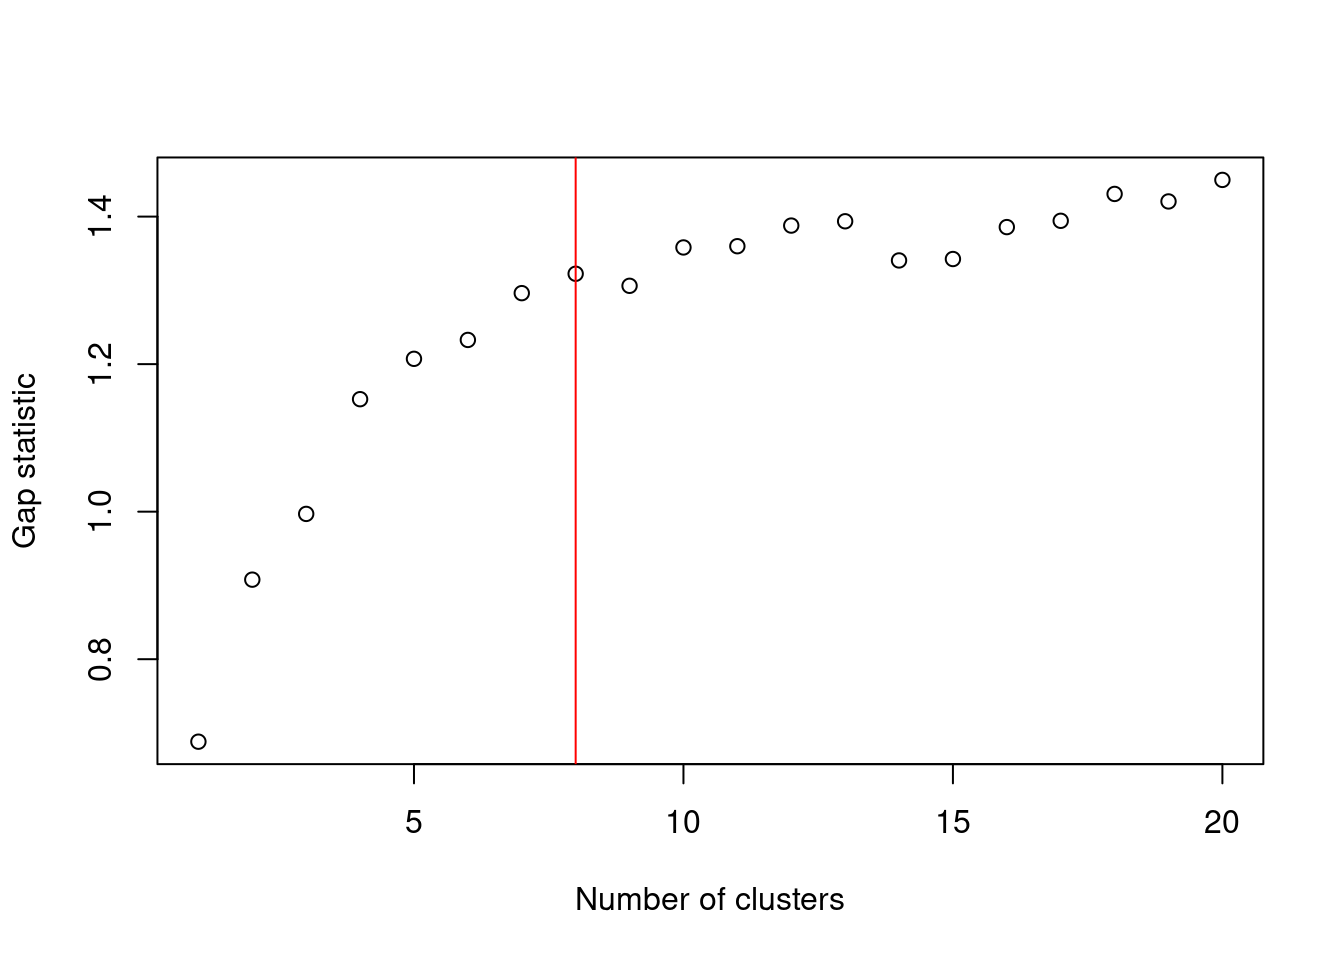 Gap statistic with respect to increasing number of $k$-means clusters in the 10X PBMC dataset. The red line represents the chosen $k$.